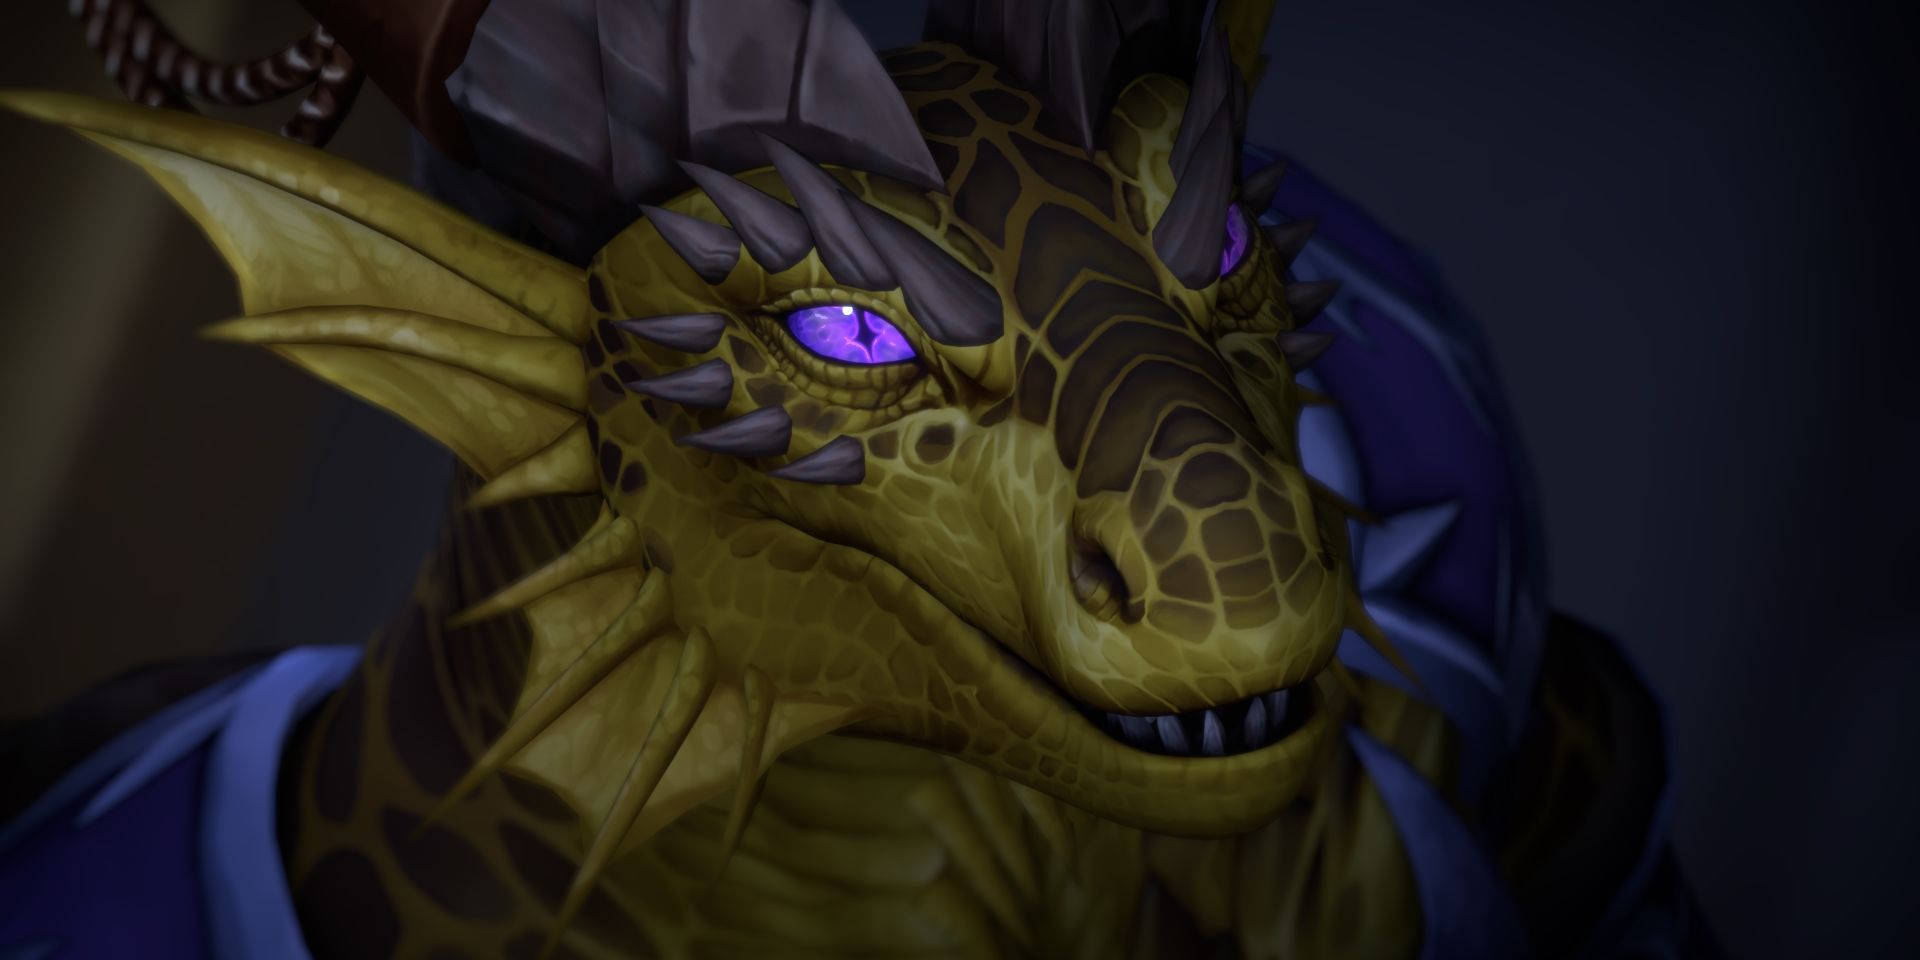 WoW Dragonflight Sarkareth, a golden dragon with vibrant purple eyes